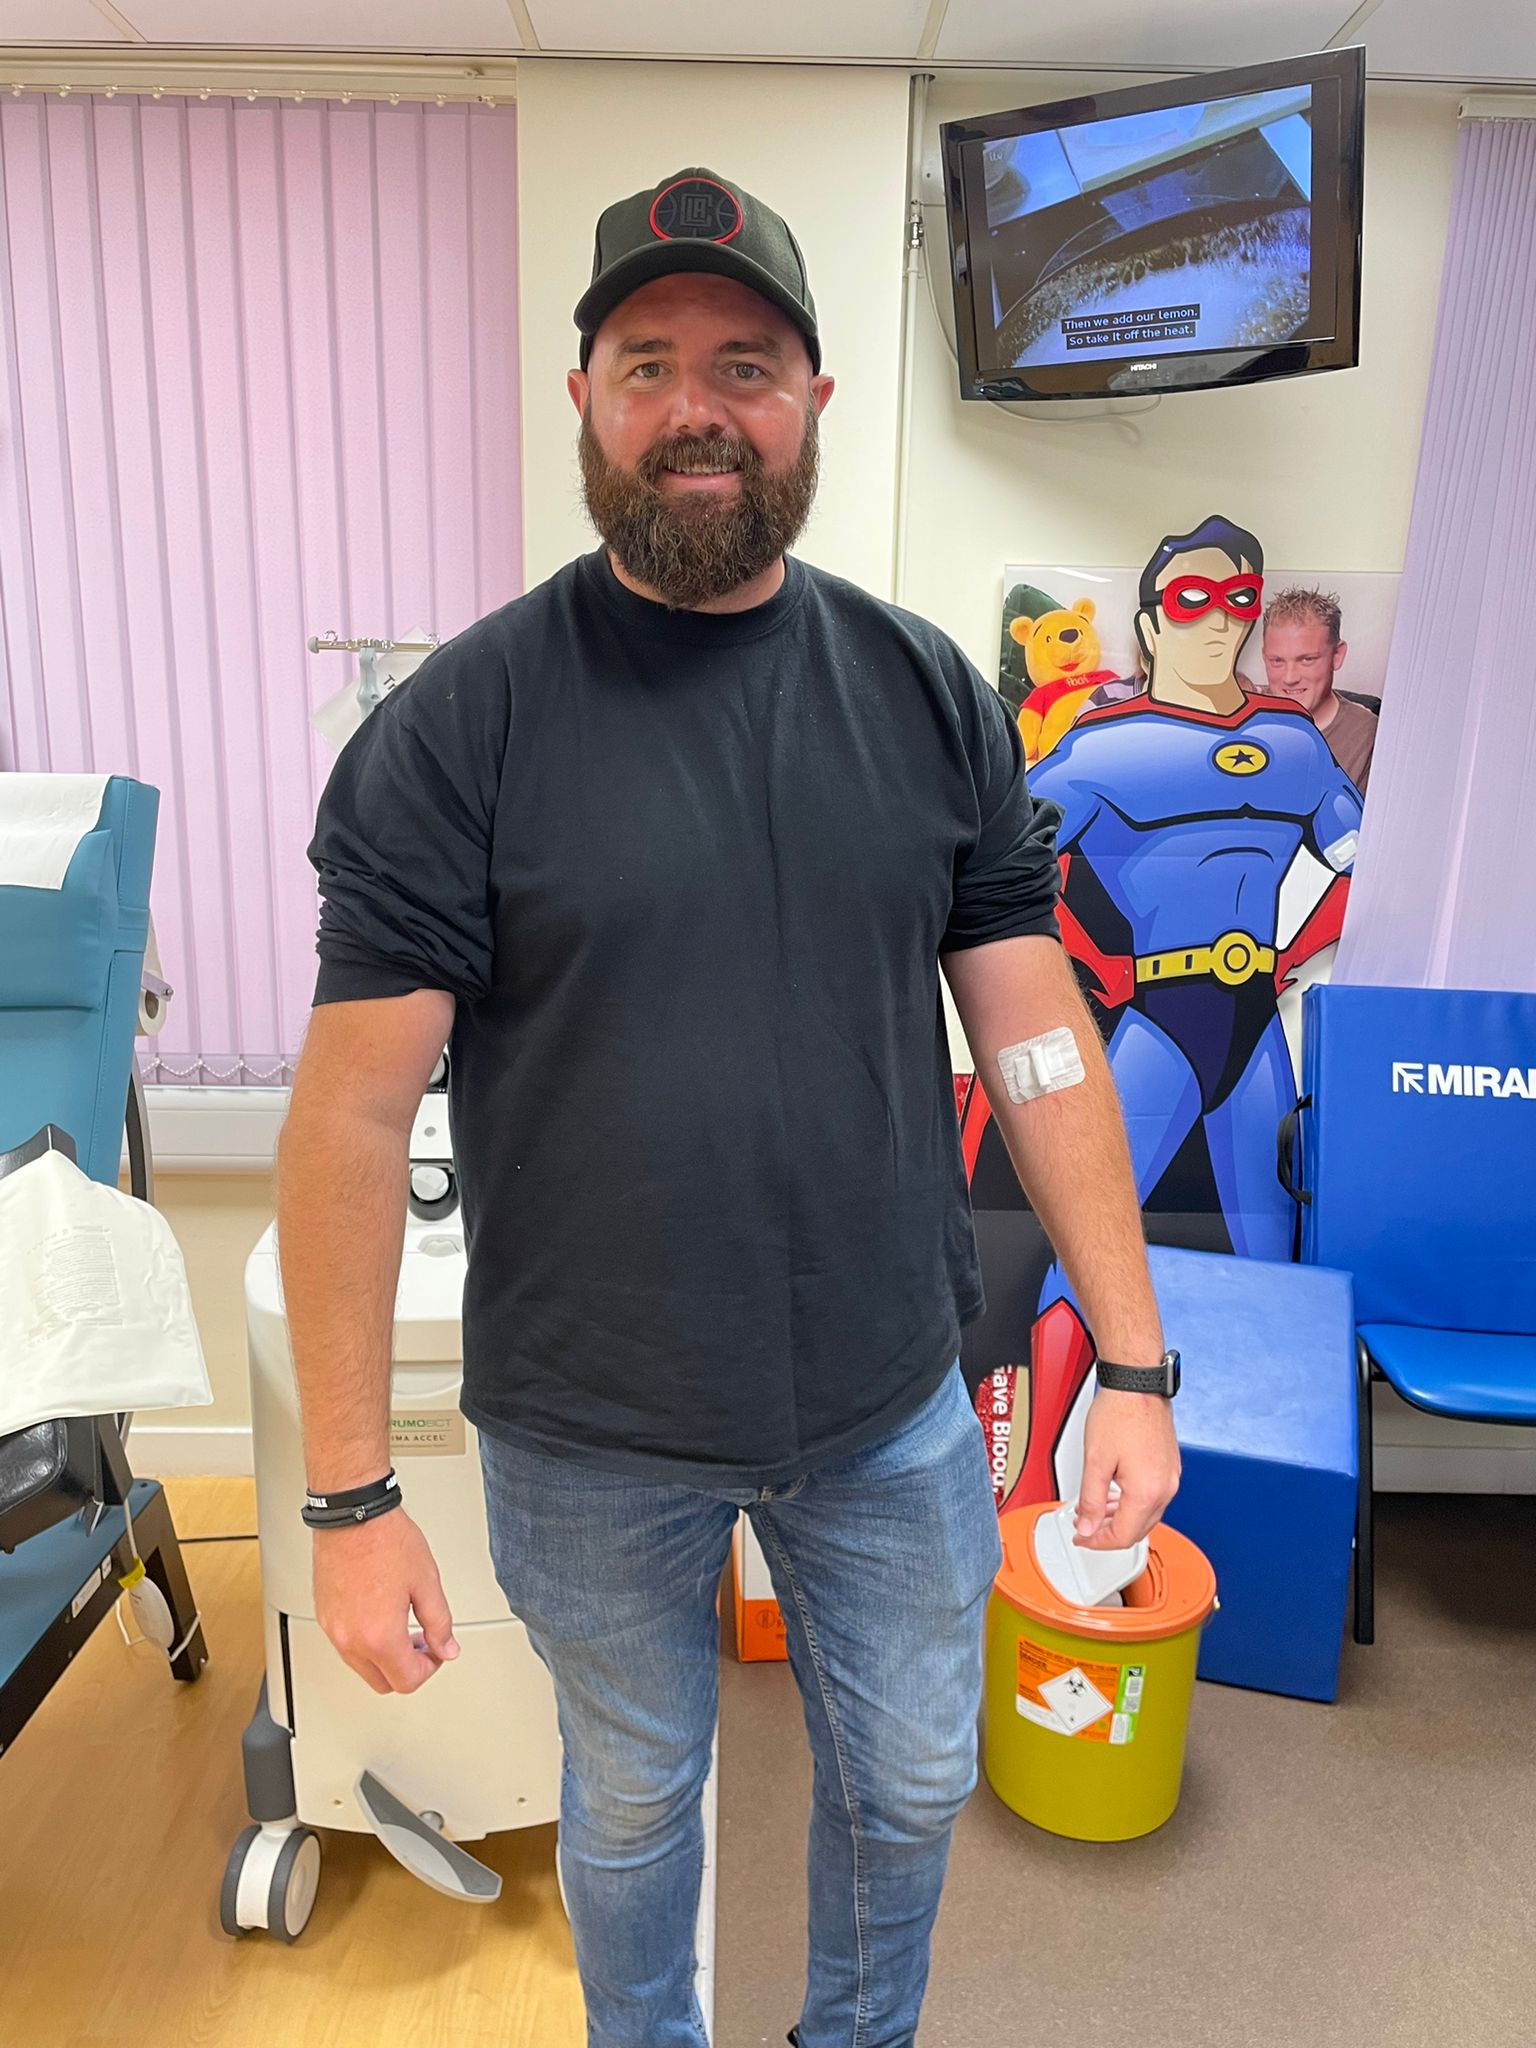 Carl Etherington, from Castleford, West Yorkshire, gave blood during Saturday’s campaign and said the atmosphere at the donor centre was “brilliant”. (Who Is Hussain/PA)